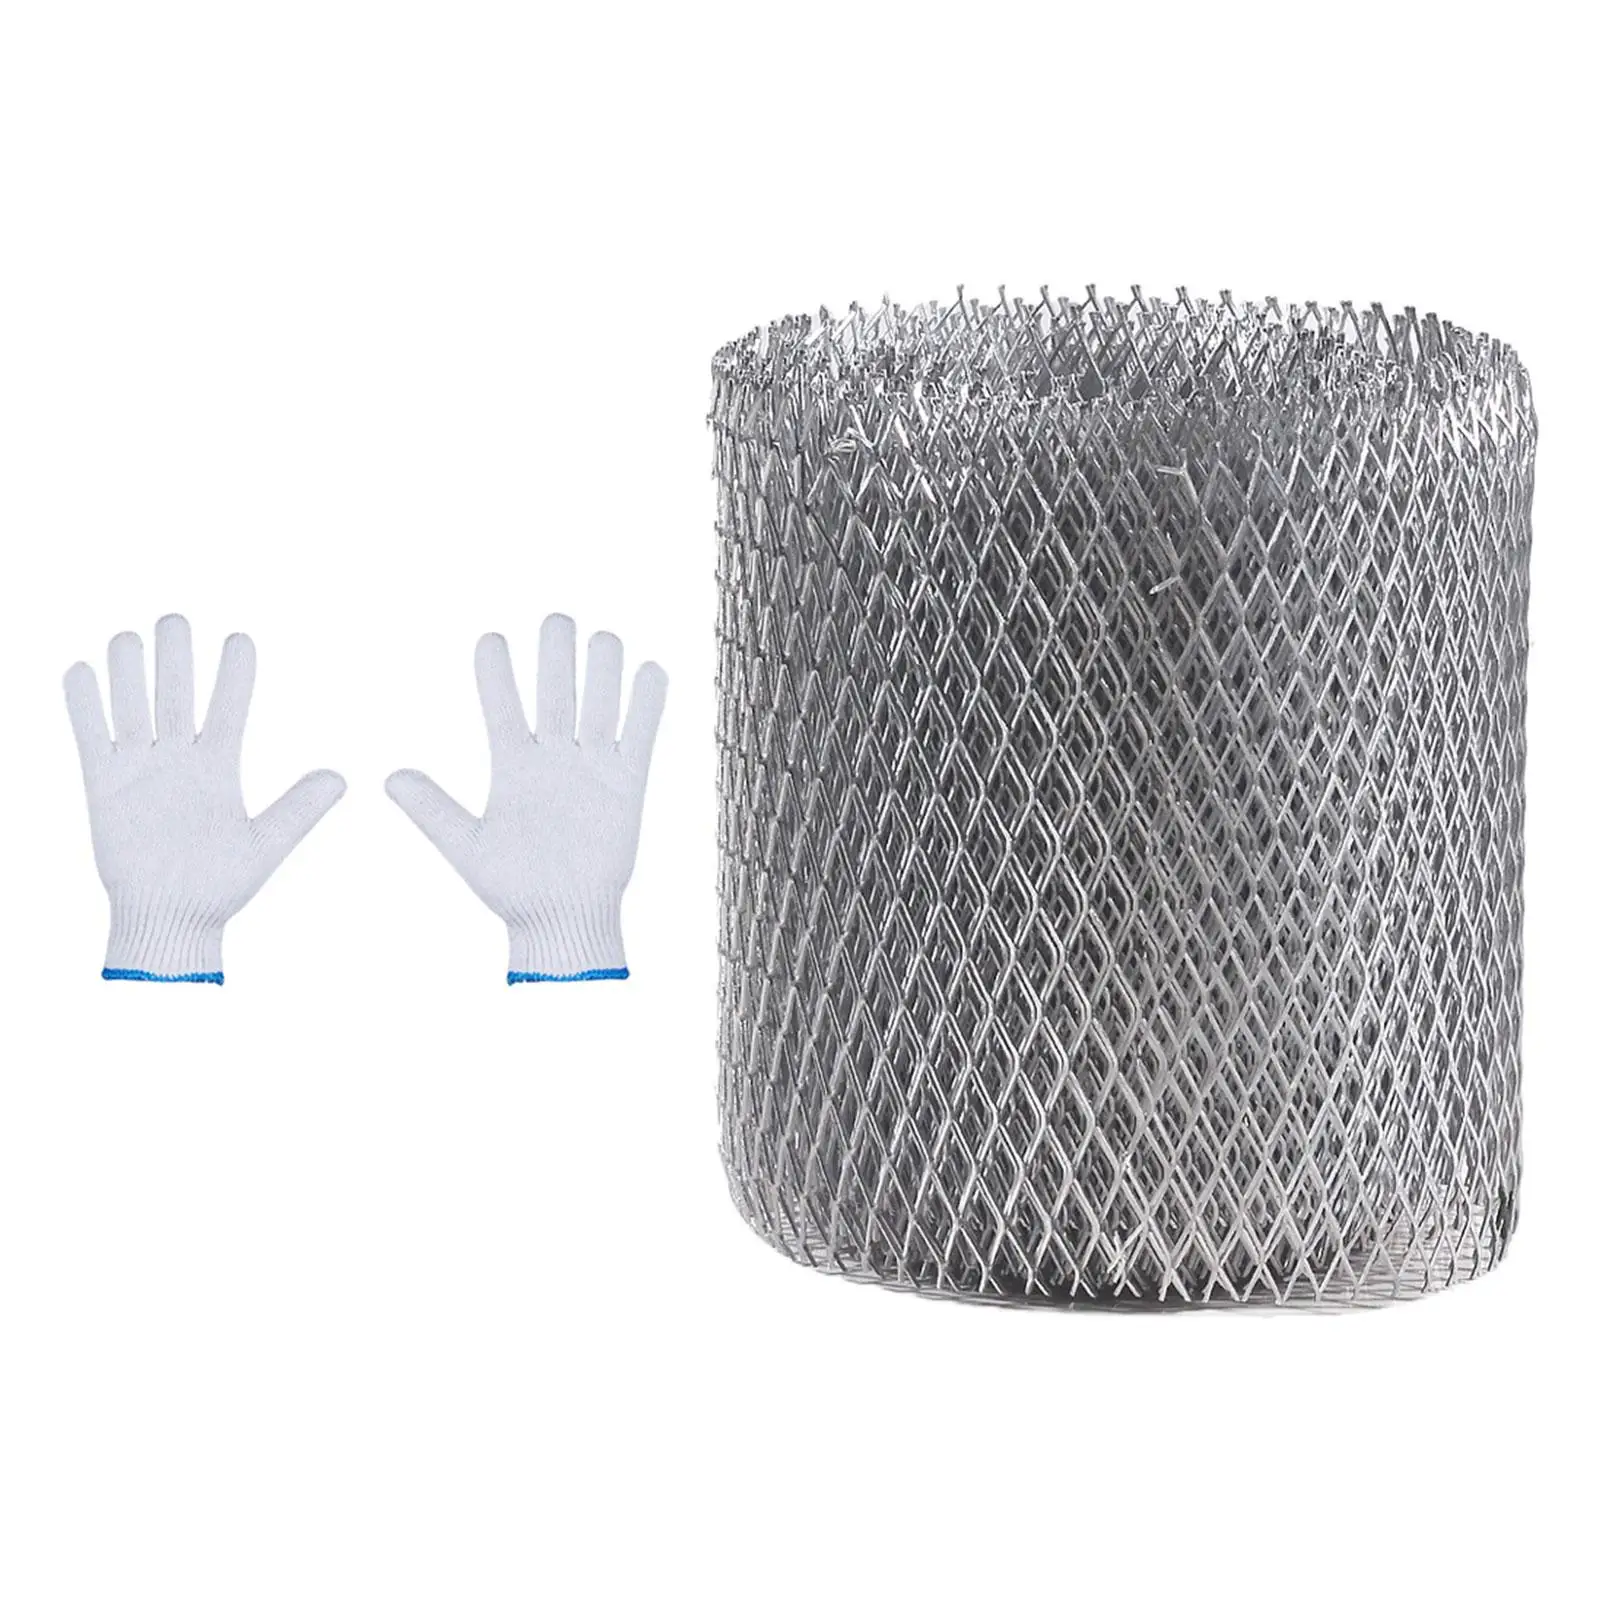 Gutter Guard Mesh Drains Filter Strainer Leaf Prevention Stable Practical with